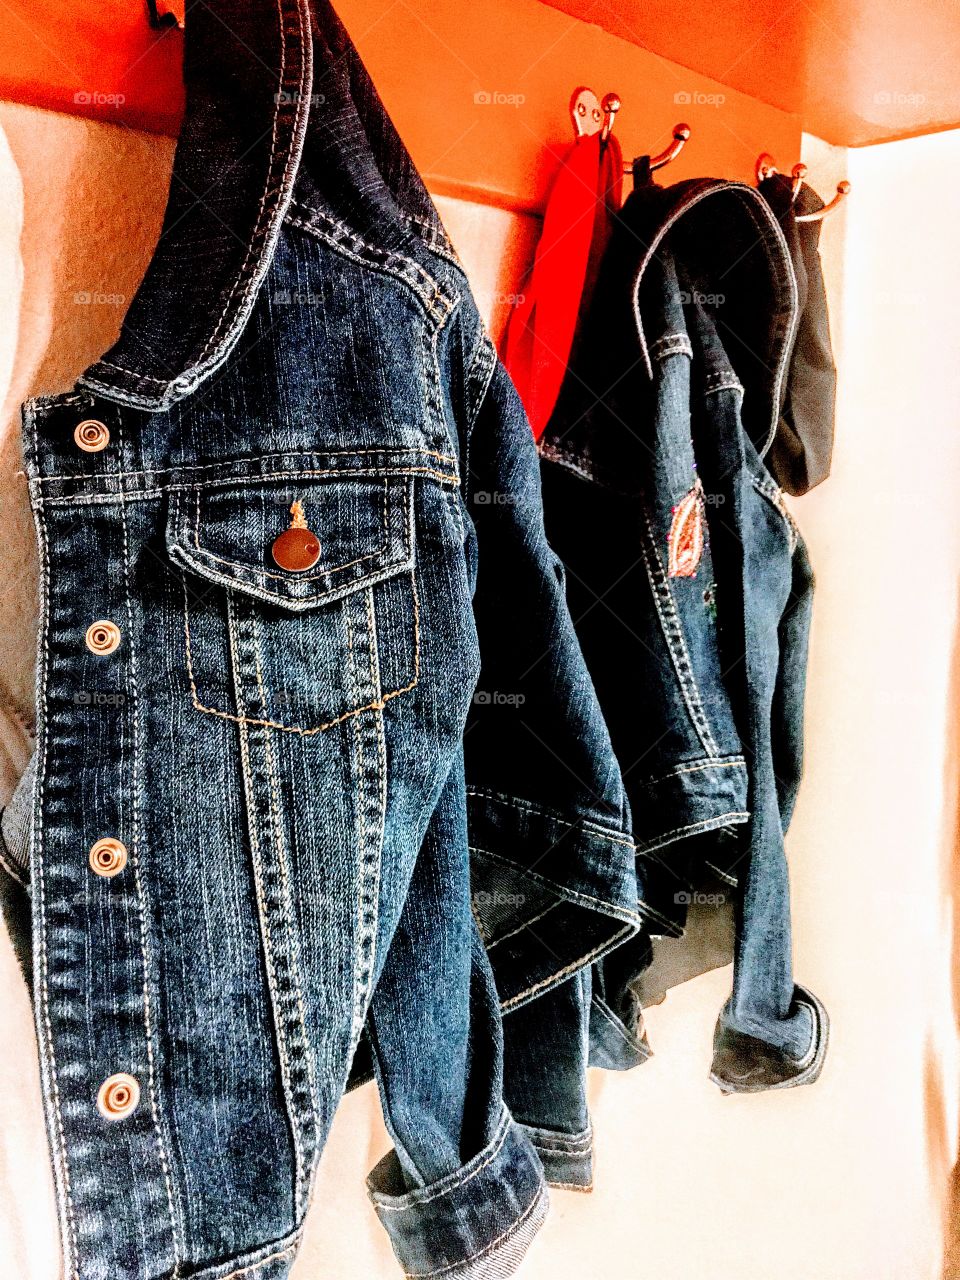 Pair of blue jeans jackets hanging close together on on a orange poles.